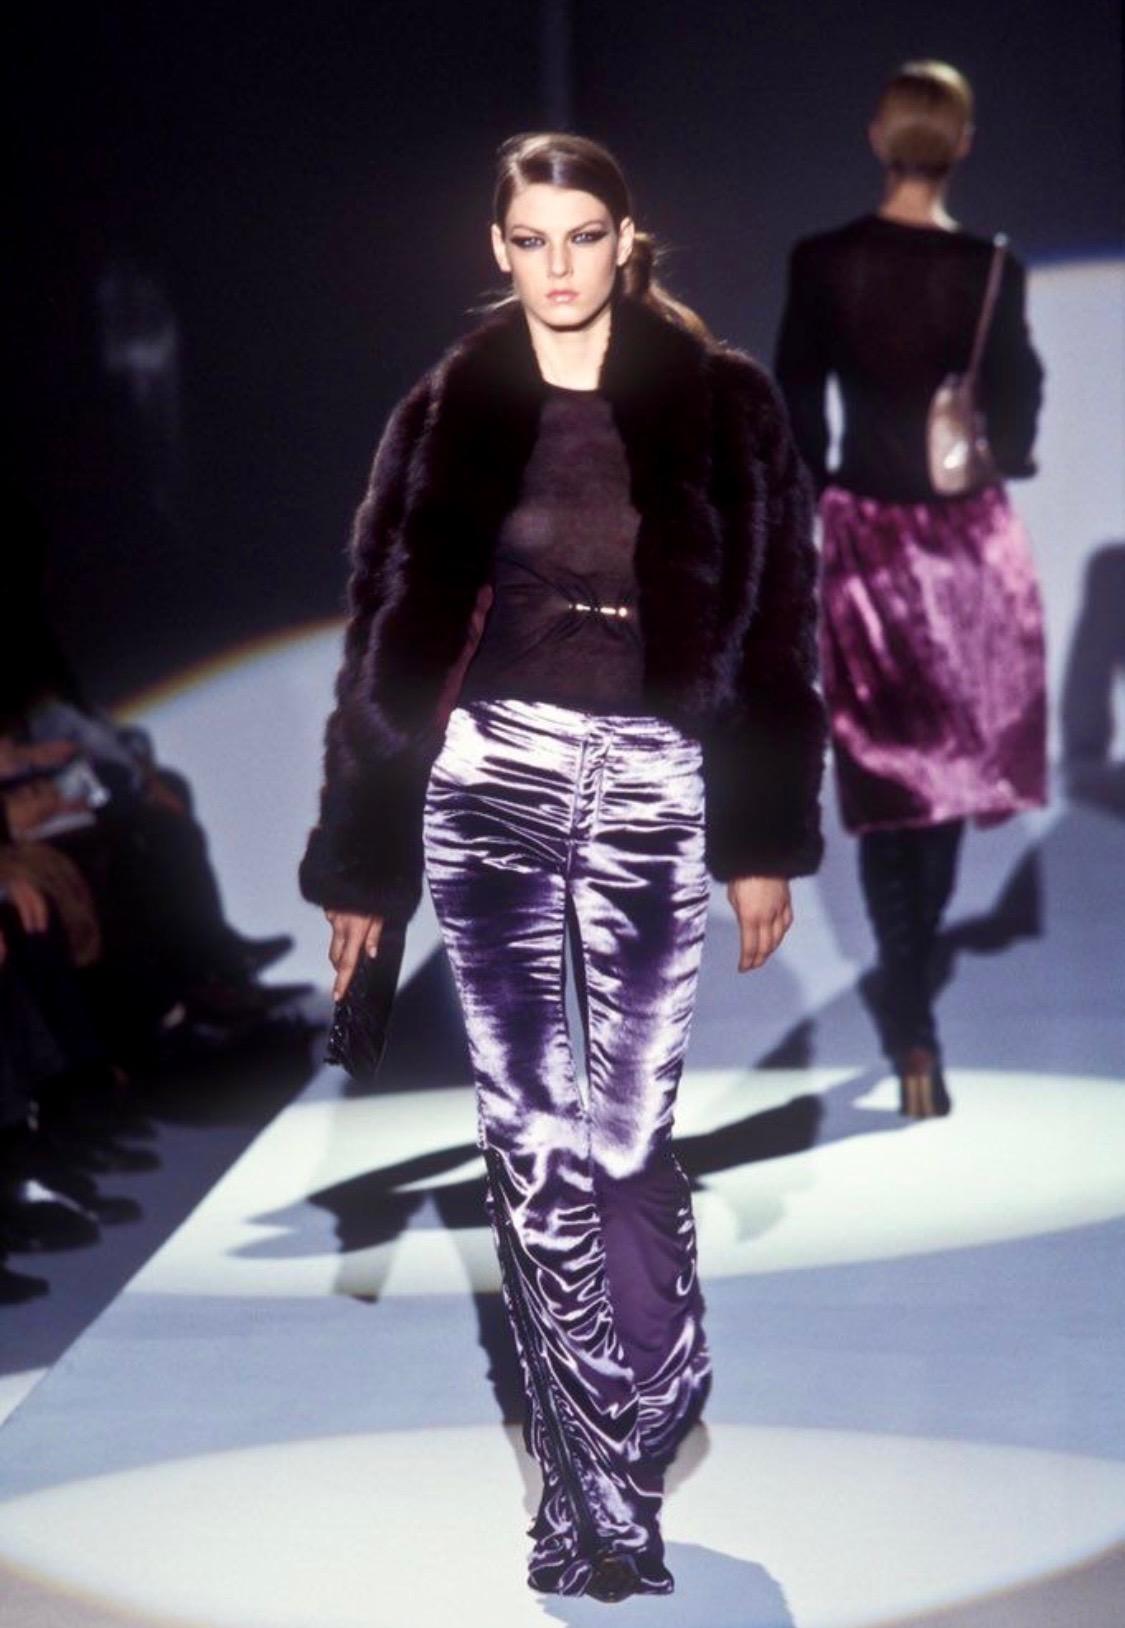 Presenting a pair of fabulous ruched purple velvet pants designed by Tom Ford for Gucci's Fall/Winter 1999 collection. Debuting on the season's runway in lavender and black, these shimmering pants feature leather strips on the sides of each calf to